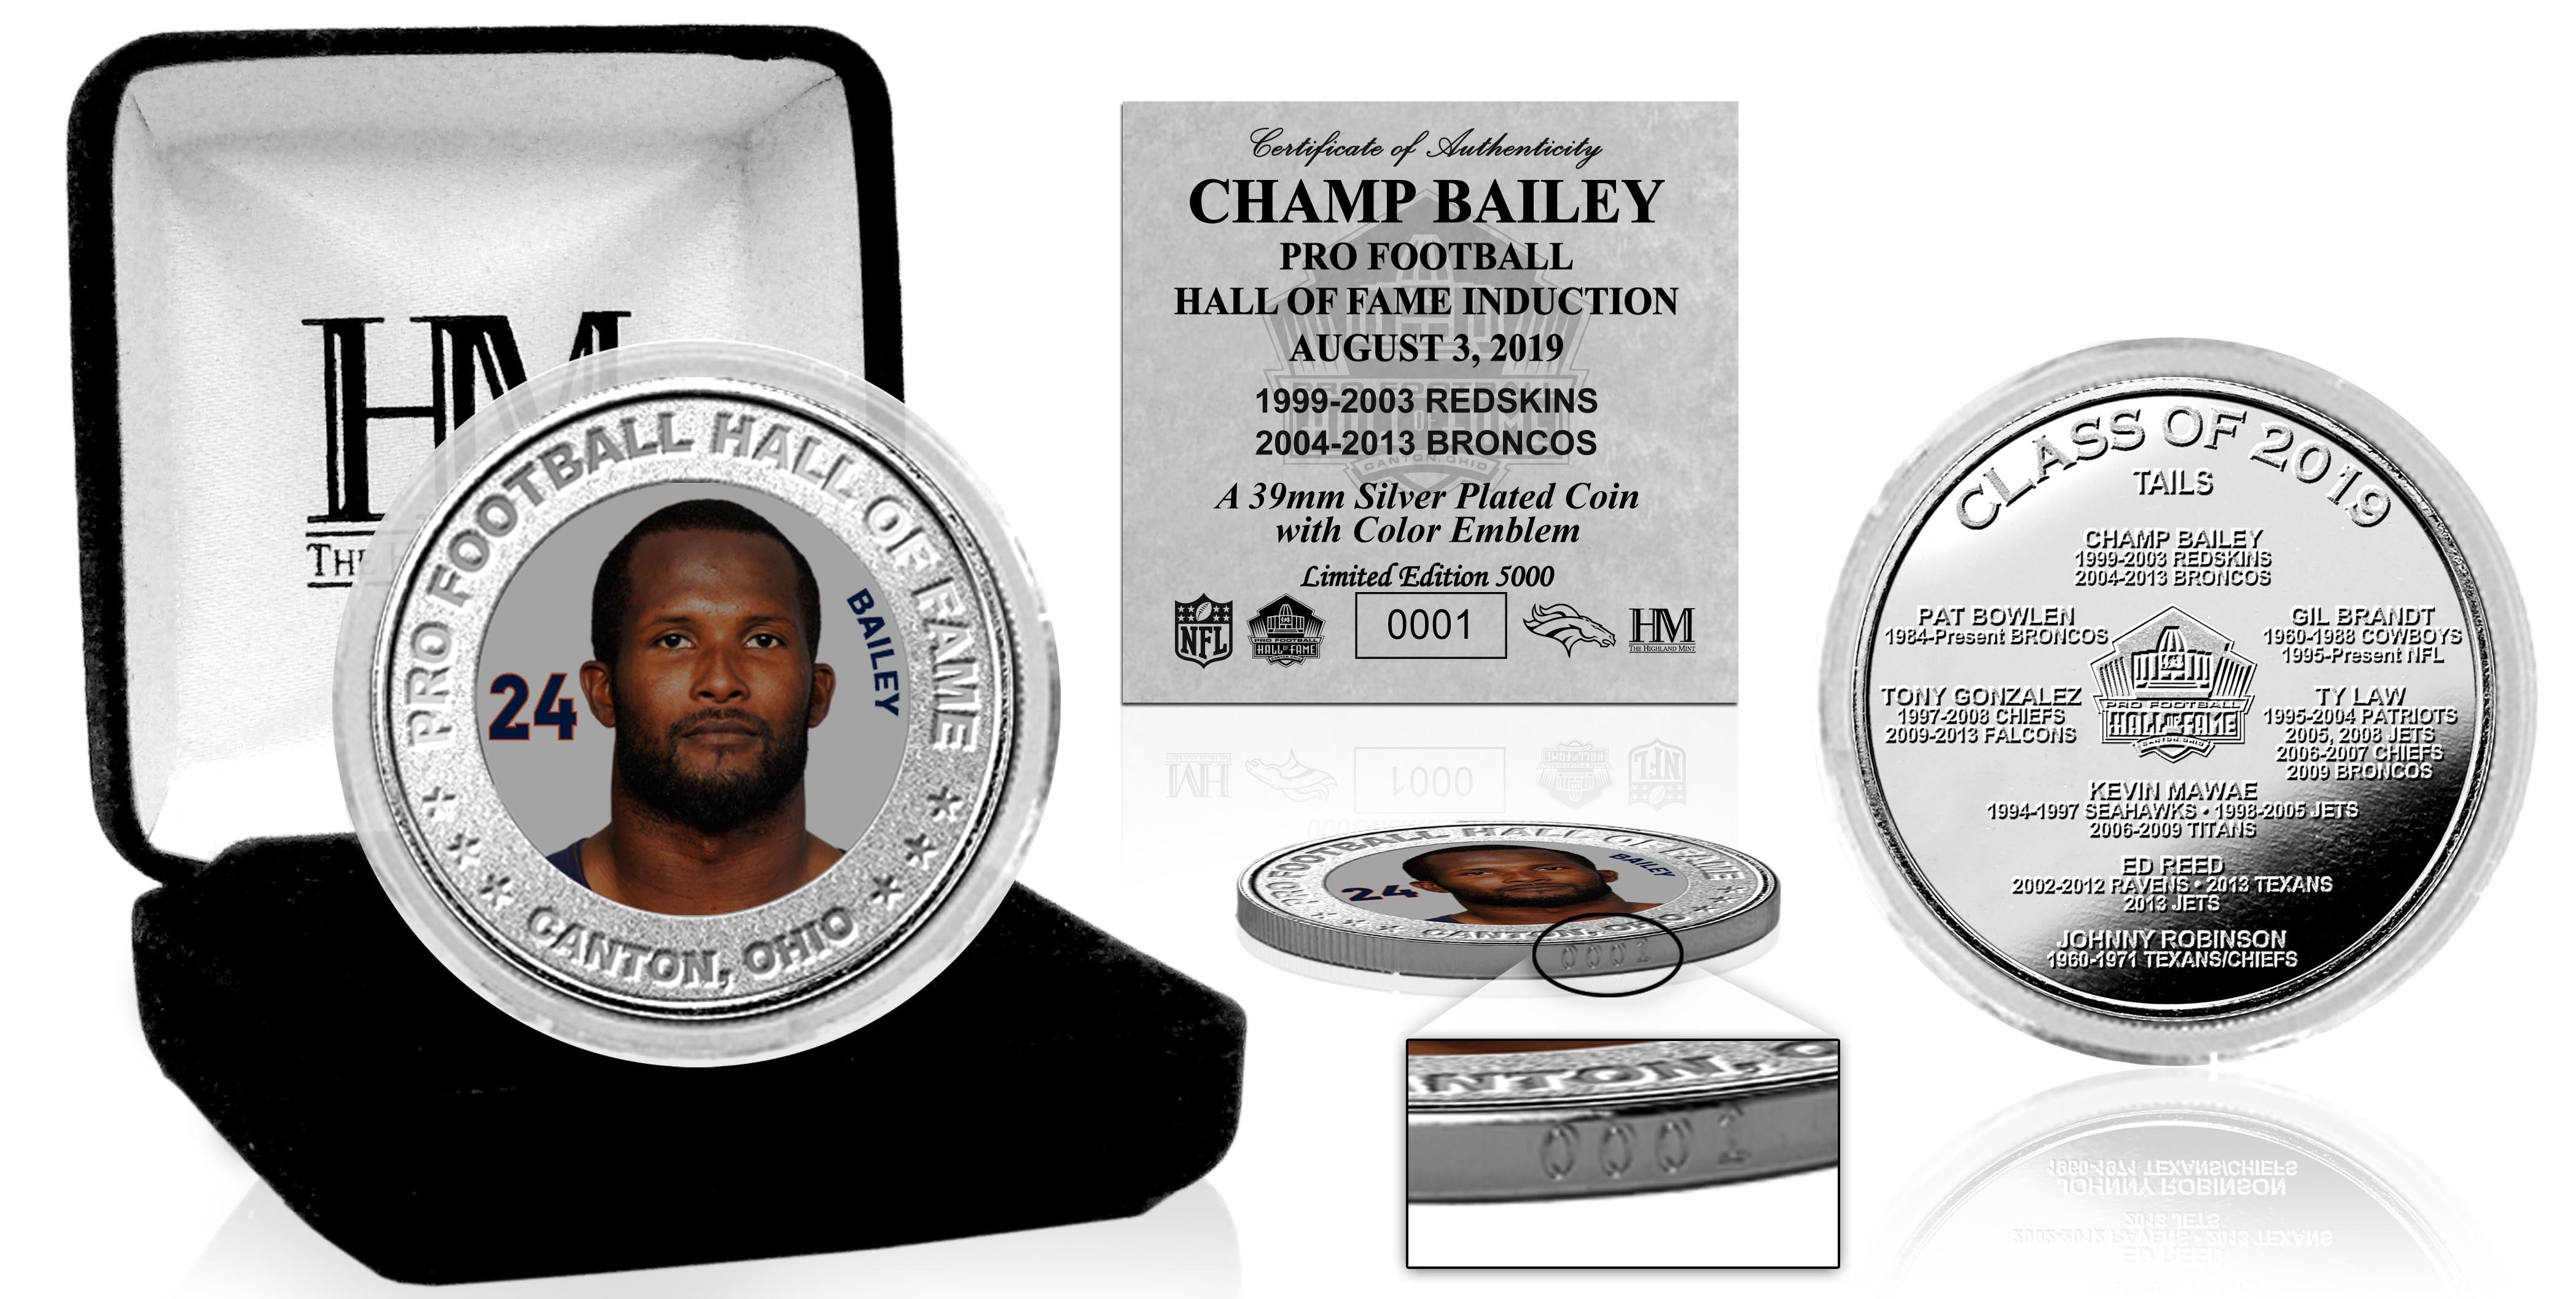 Champ Bailey Hall of Fame 2019 Silver Mint Coin